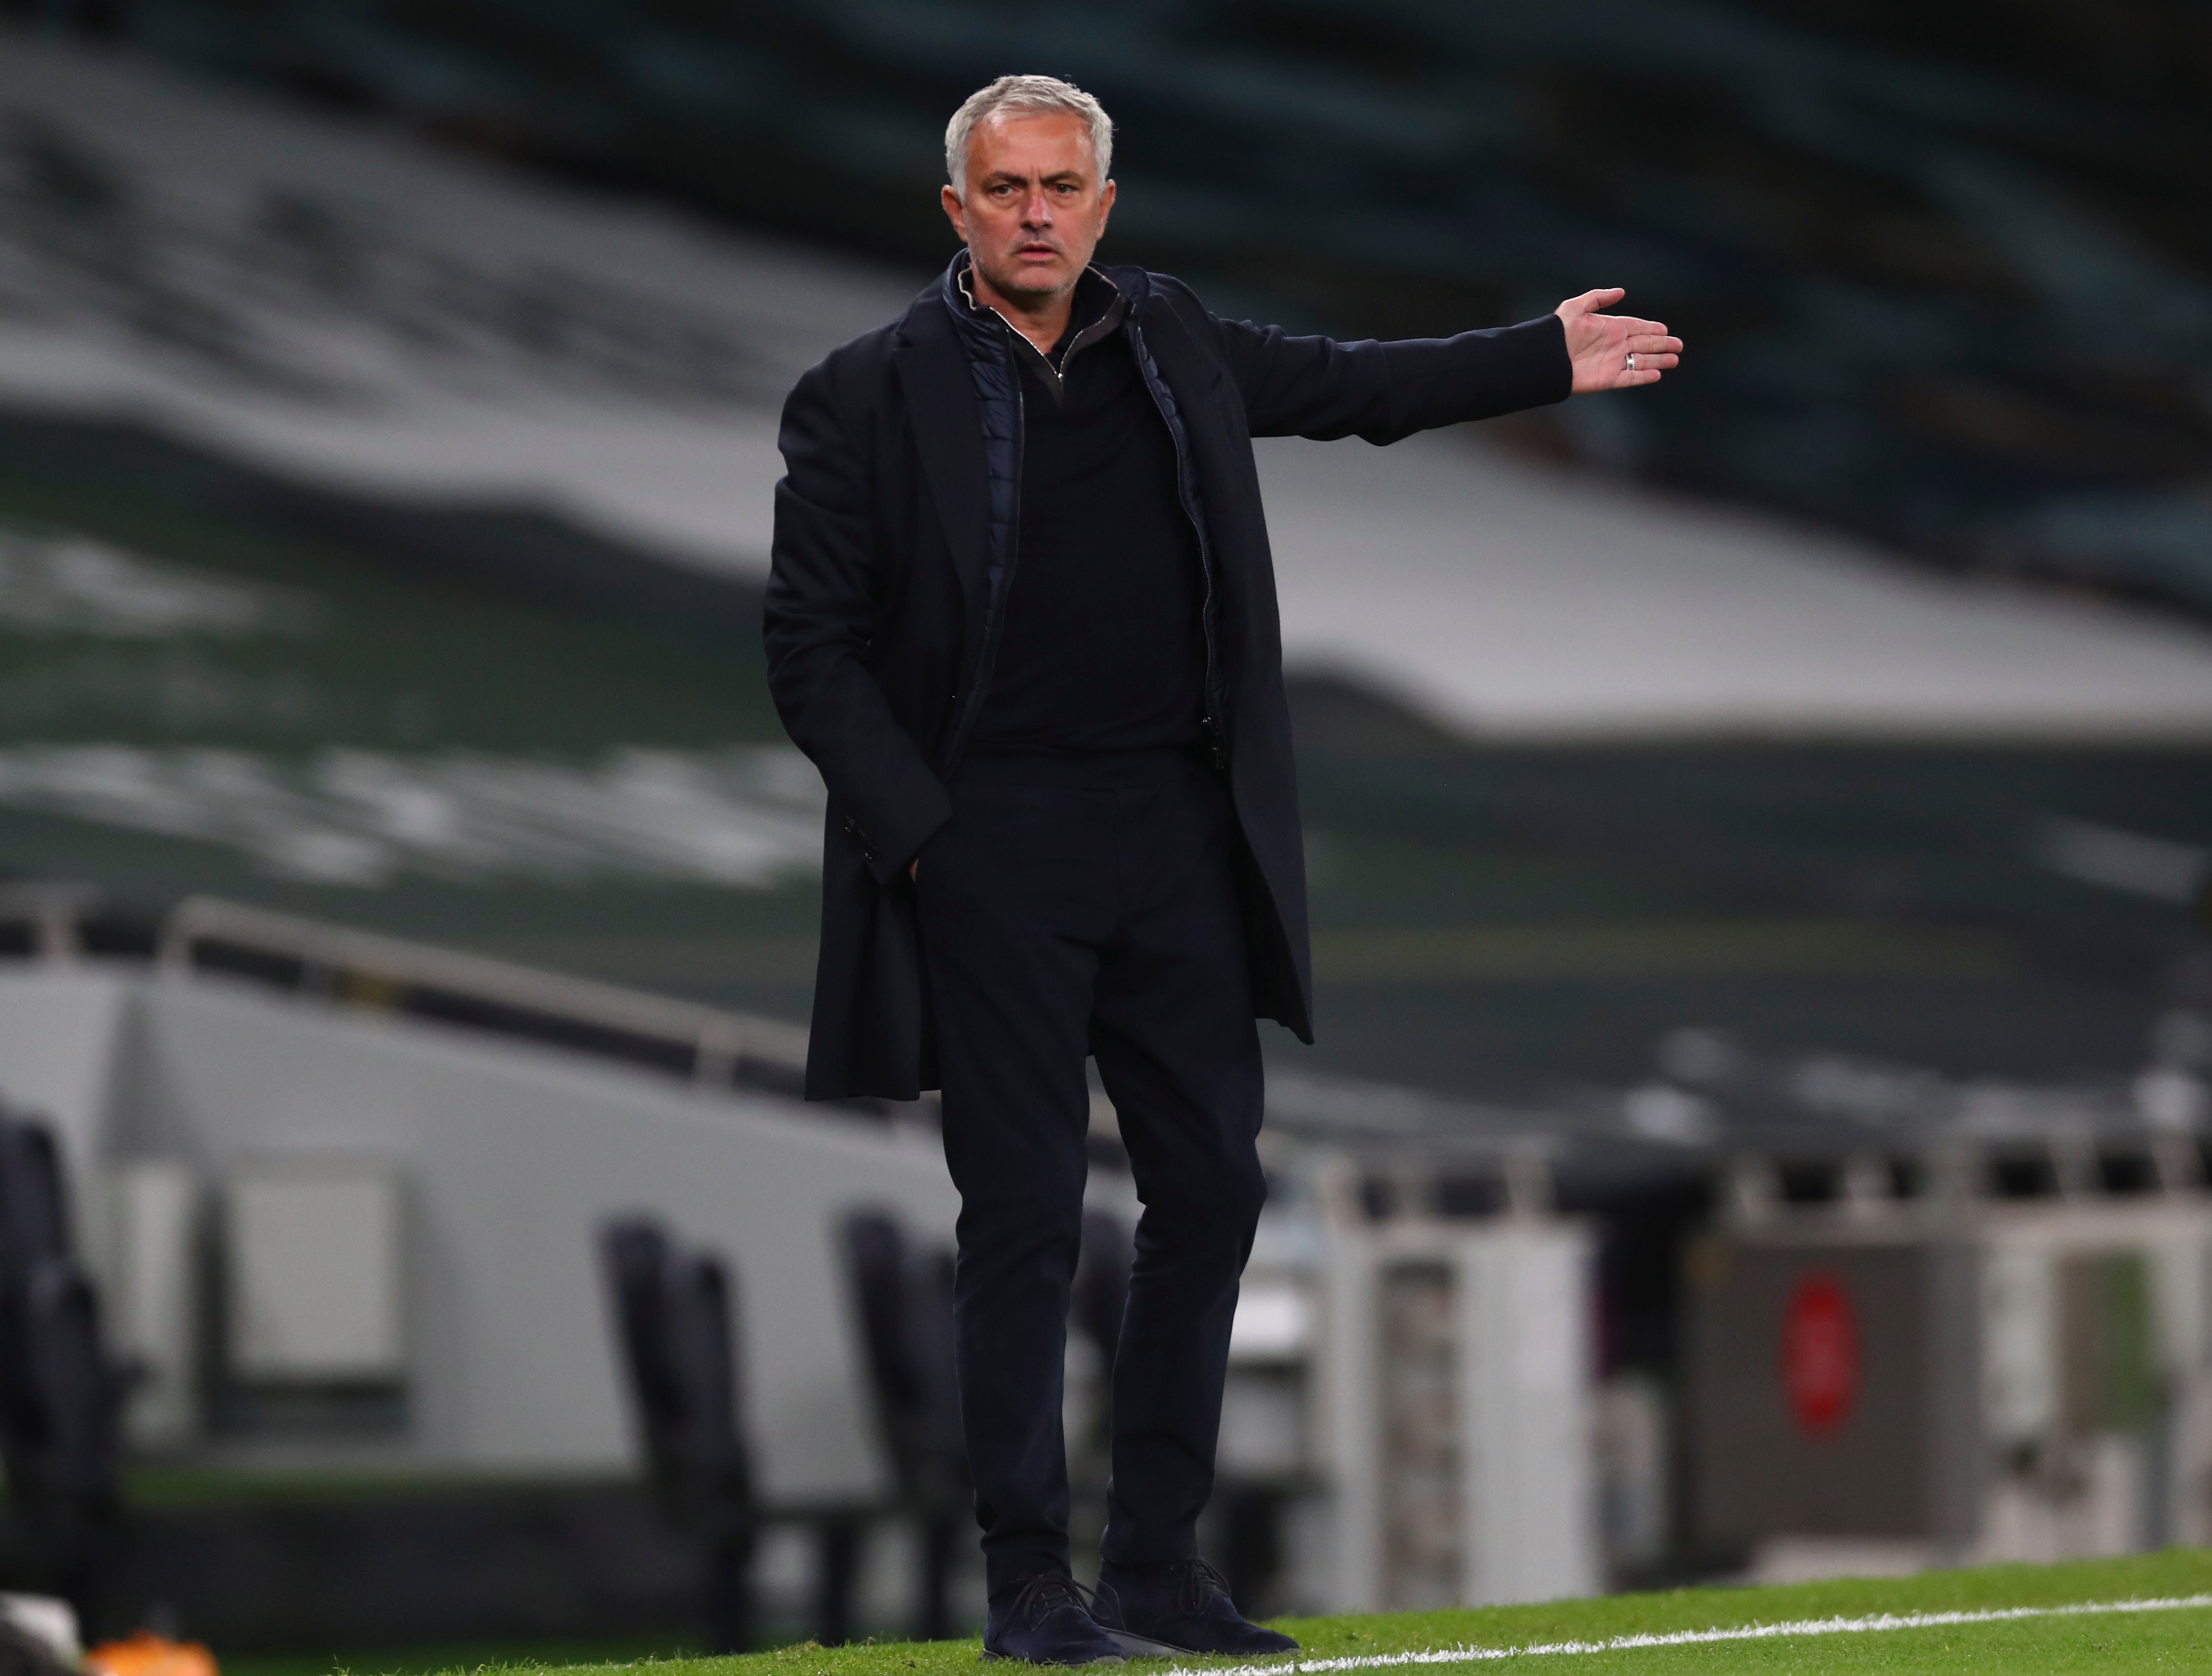 Jose Mourinho is confident Spurs will get through the group stage unscathed